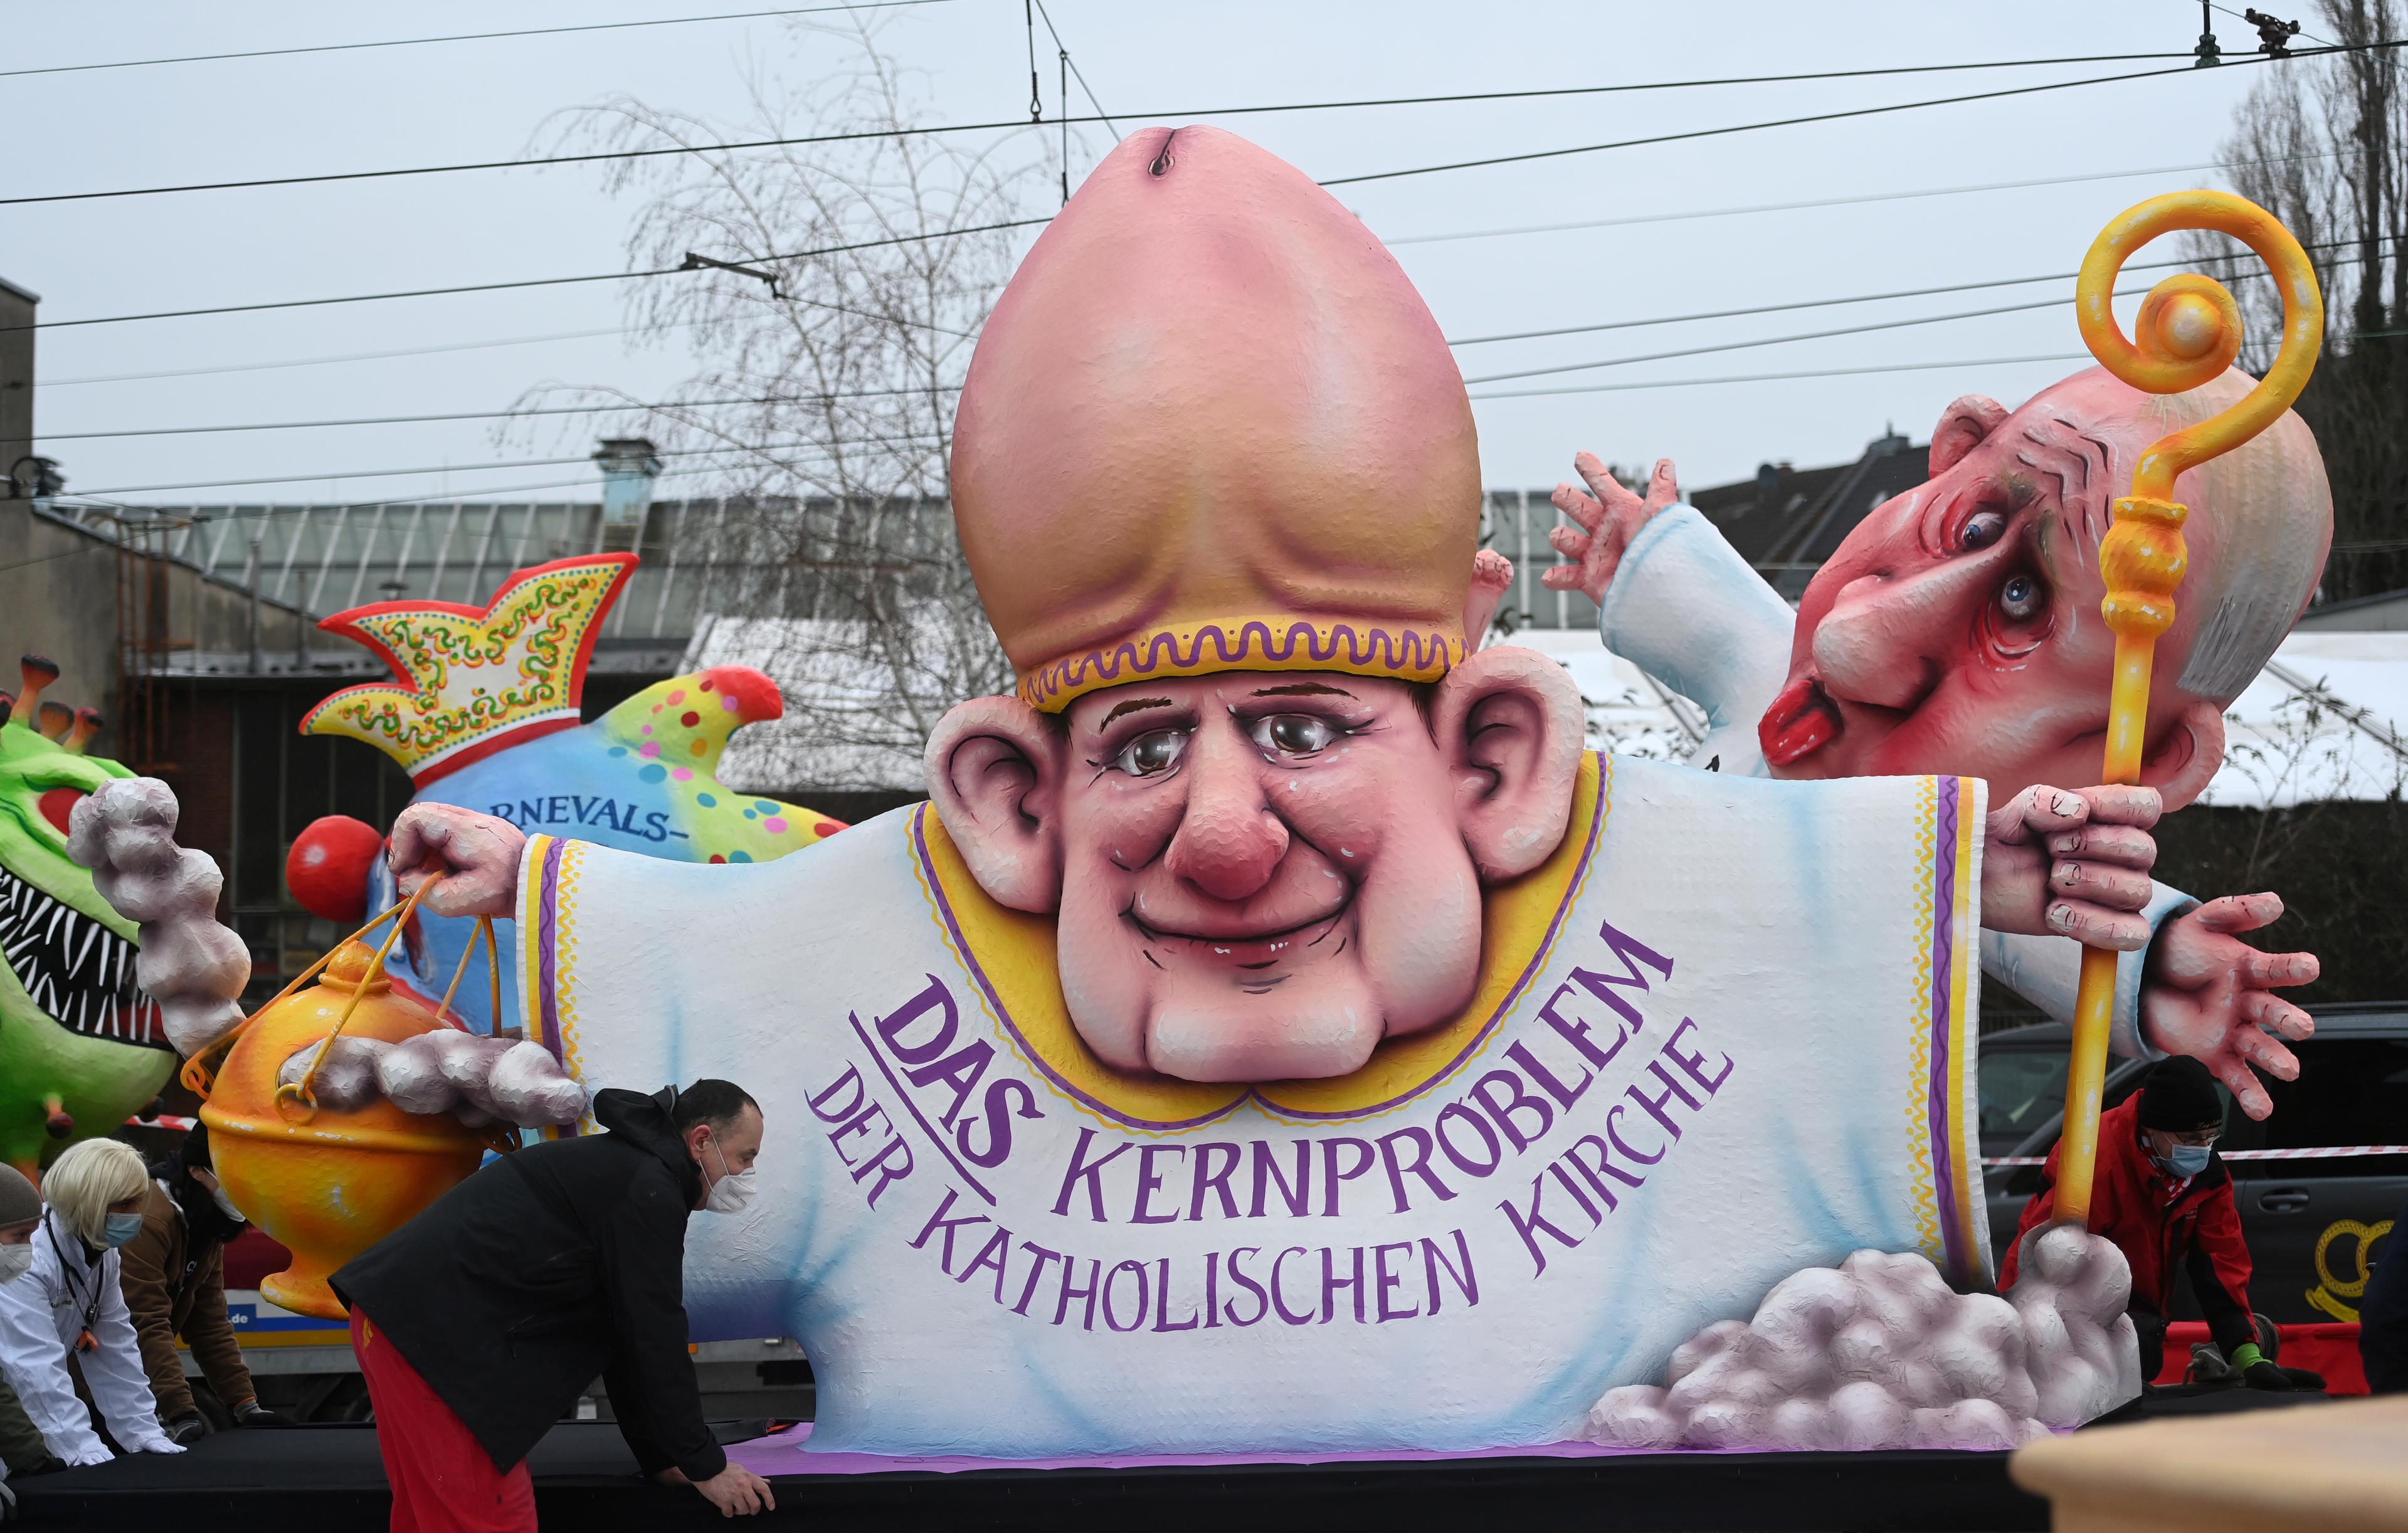 Helpers push a carnival float depicting a Catholic bishop wearing a glans penis-shaped mitra and wearing a robe that reads "The core problem of the Catholic Church" during a slimmed down version of the traditional Rose Monday parade on February 15, 2021 in Duesseldorf, western Germany. - Due to the novel coronavirus / COVID-19 pandemic, traditional parades and festivities in Germany's carnival hotspots, mainly situated in the Rhineland region, had to be canceled or modified to conform to the rules and restrictions in order to limit the spread of the virus. (Photo by Ina Fassbender / AFP)